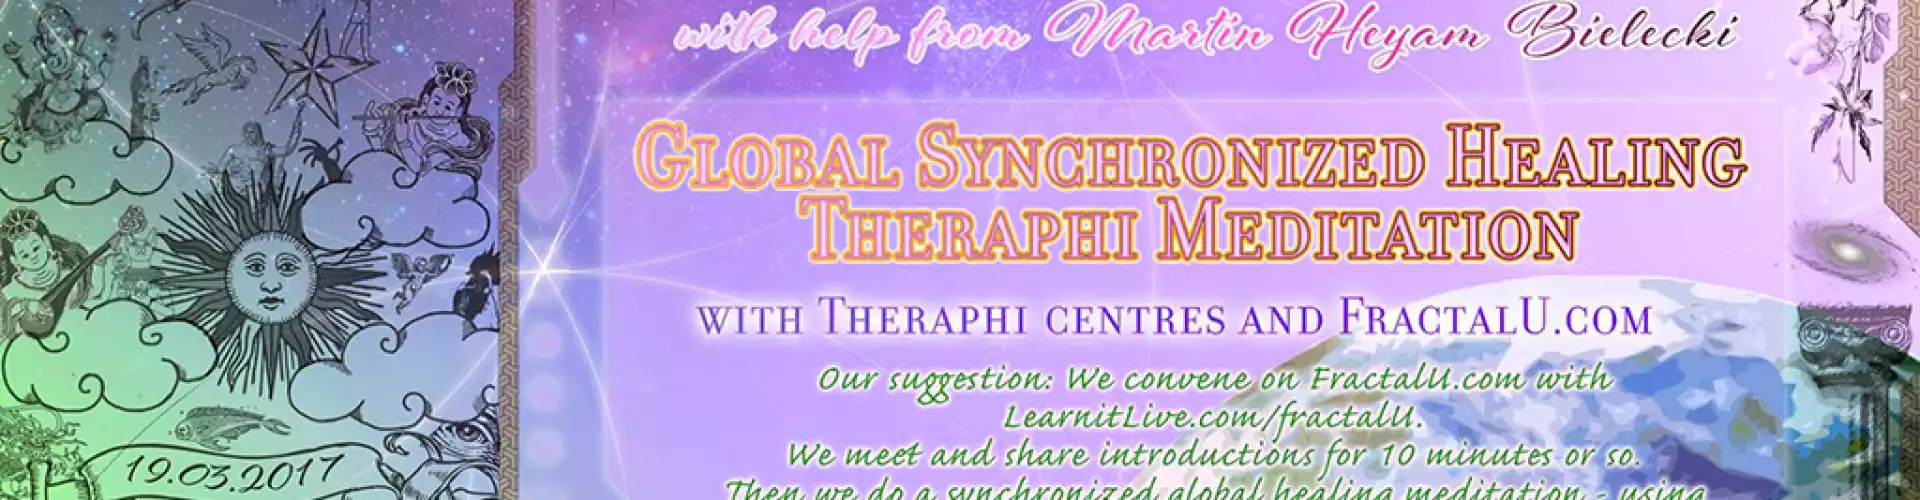 Theraphi Global HEALING  Meditation+ Conference with Therapists